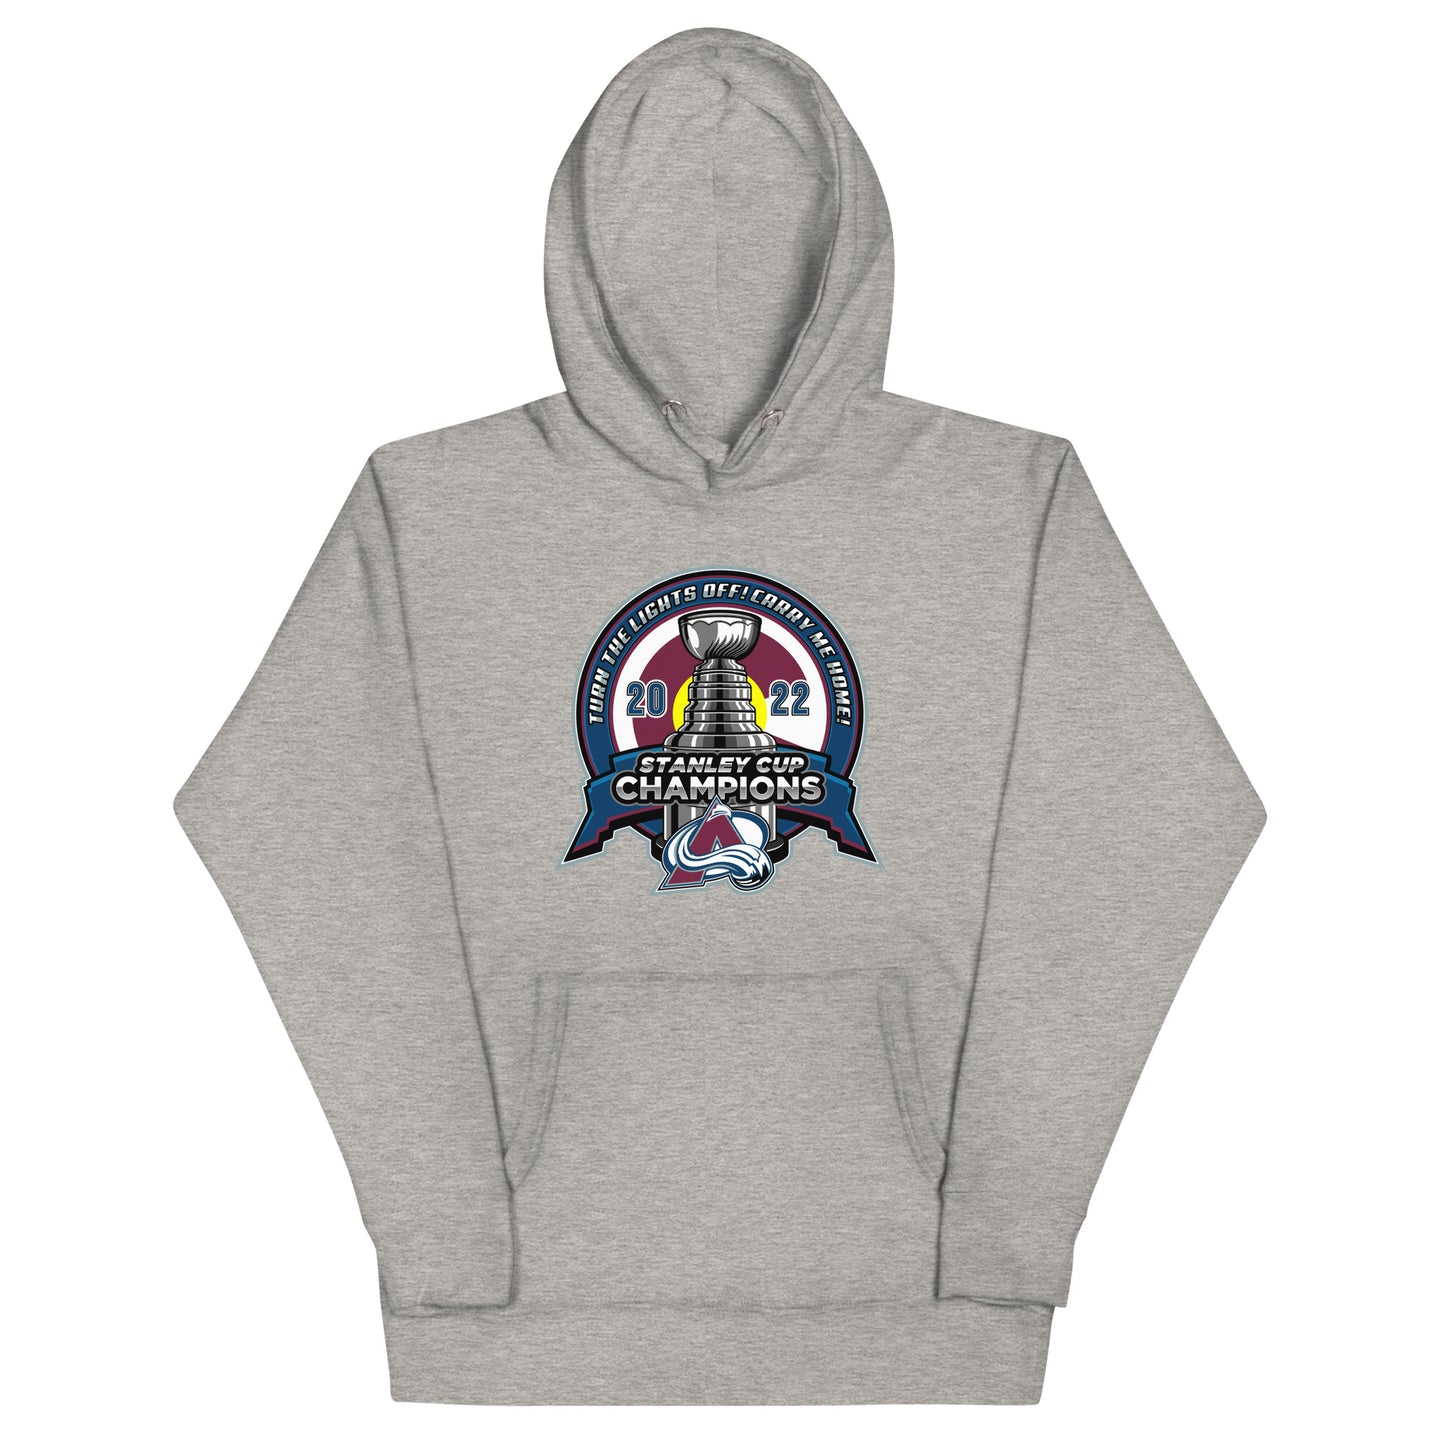 Turn The Lights Off, Carry Me Home Champs Hoodie